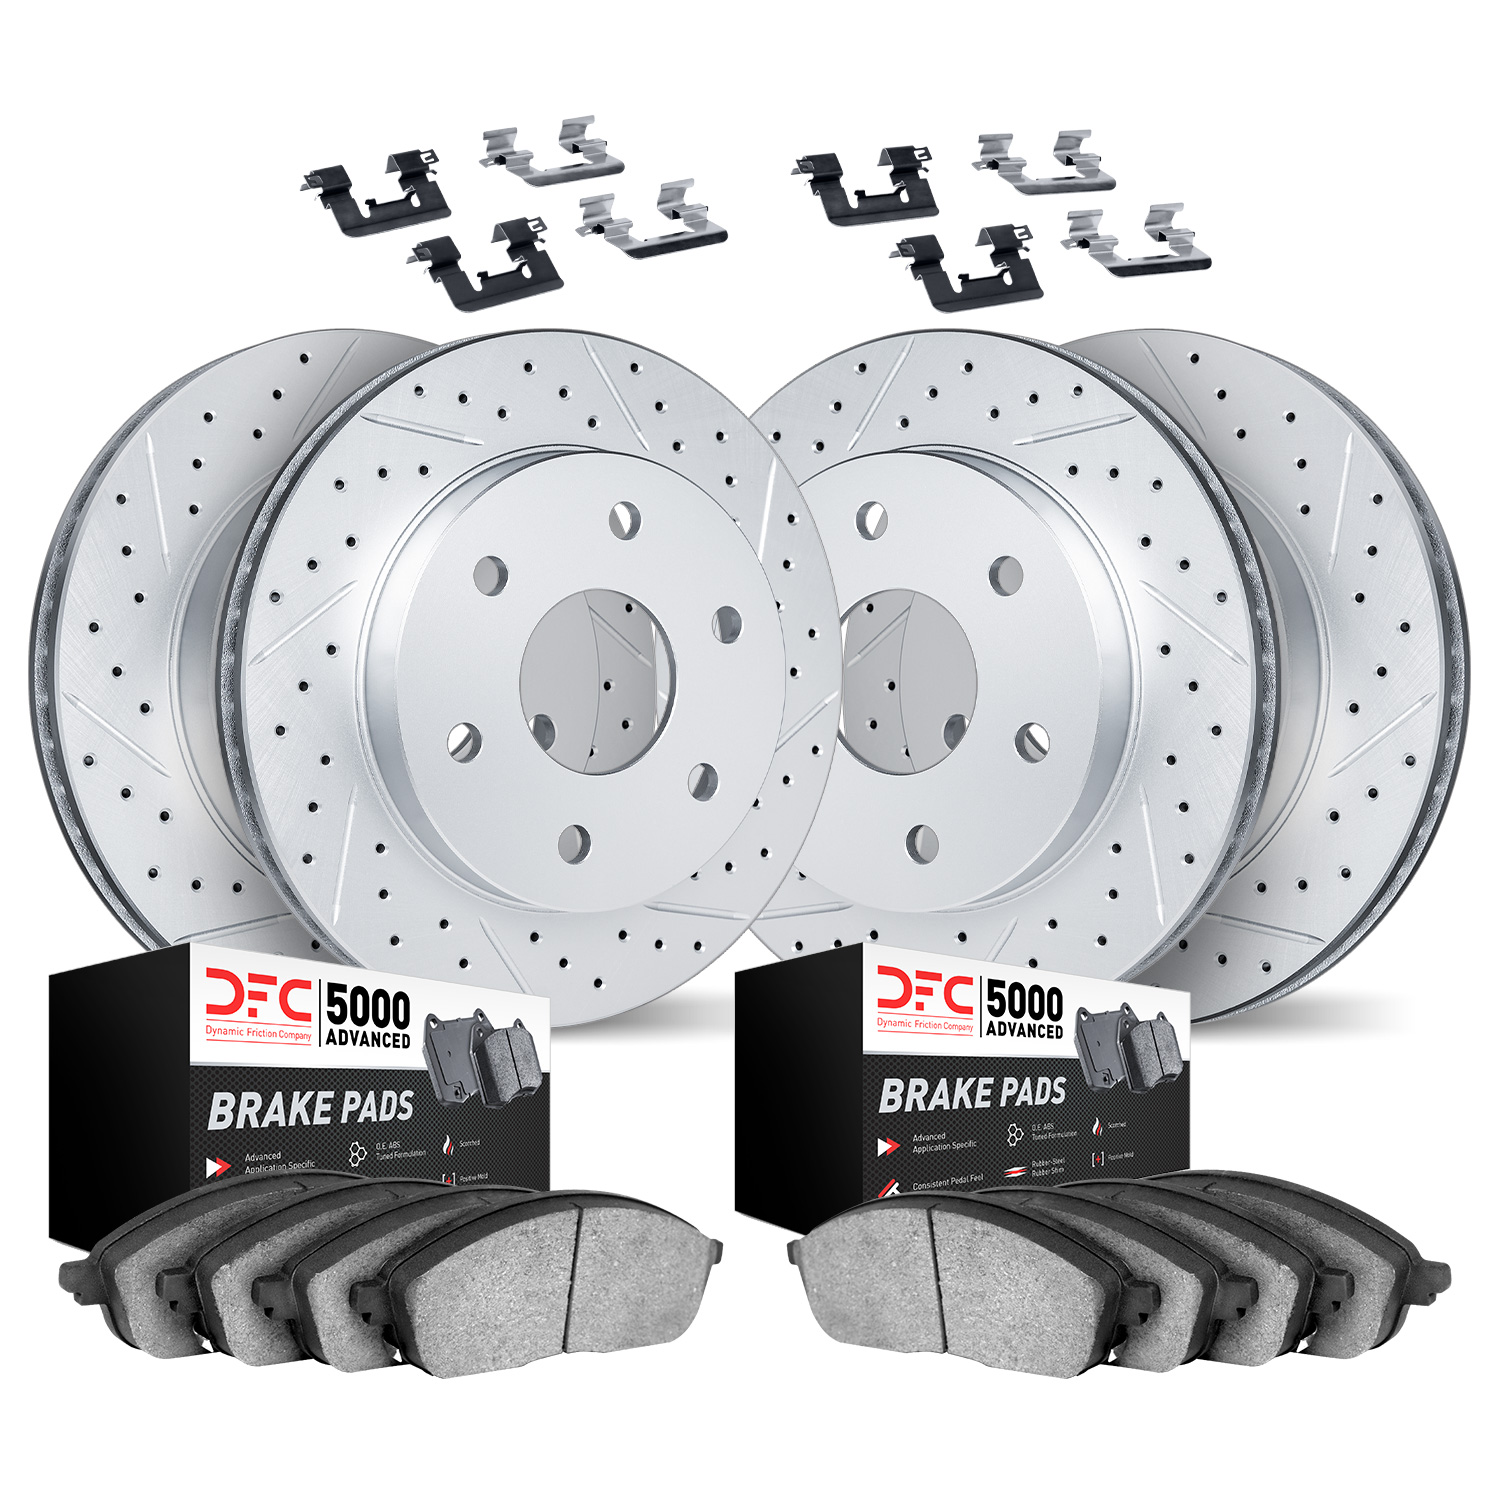 2514-48022 Geoperformance Drilled/Slotted Rotors w/5000 Advanced Brake Pads Kit & Hardware, 2002-2008 GM, Position: Front and Re